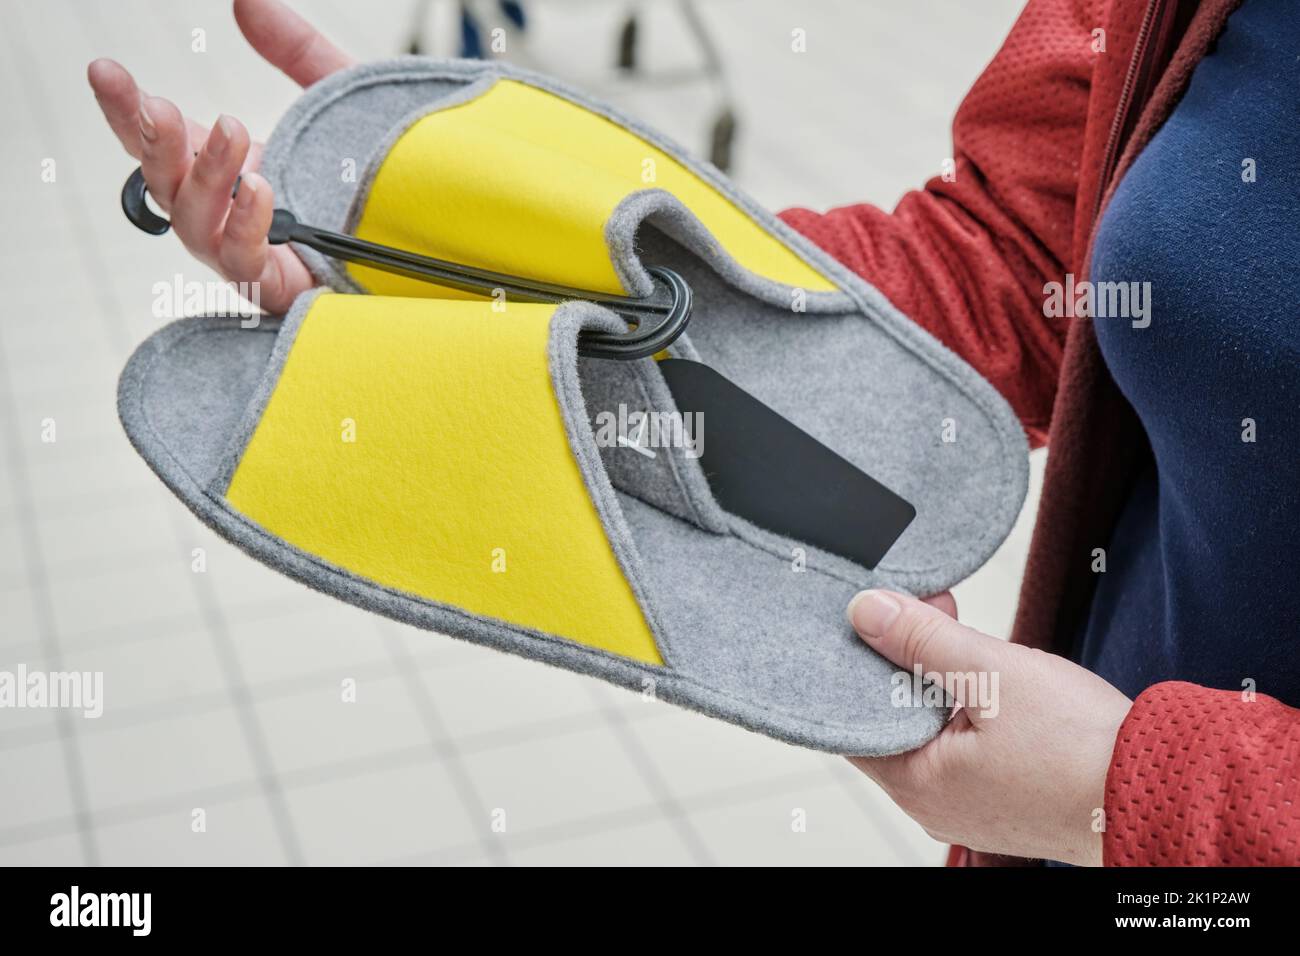 Woman chooses soft yellow felt slippers in store to buy. Hands close up Stock Photo